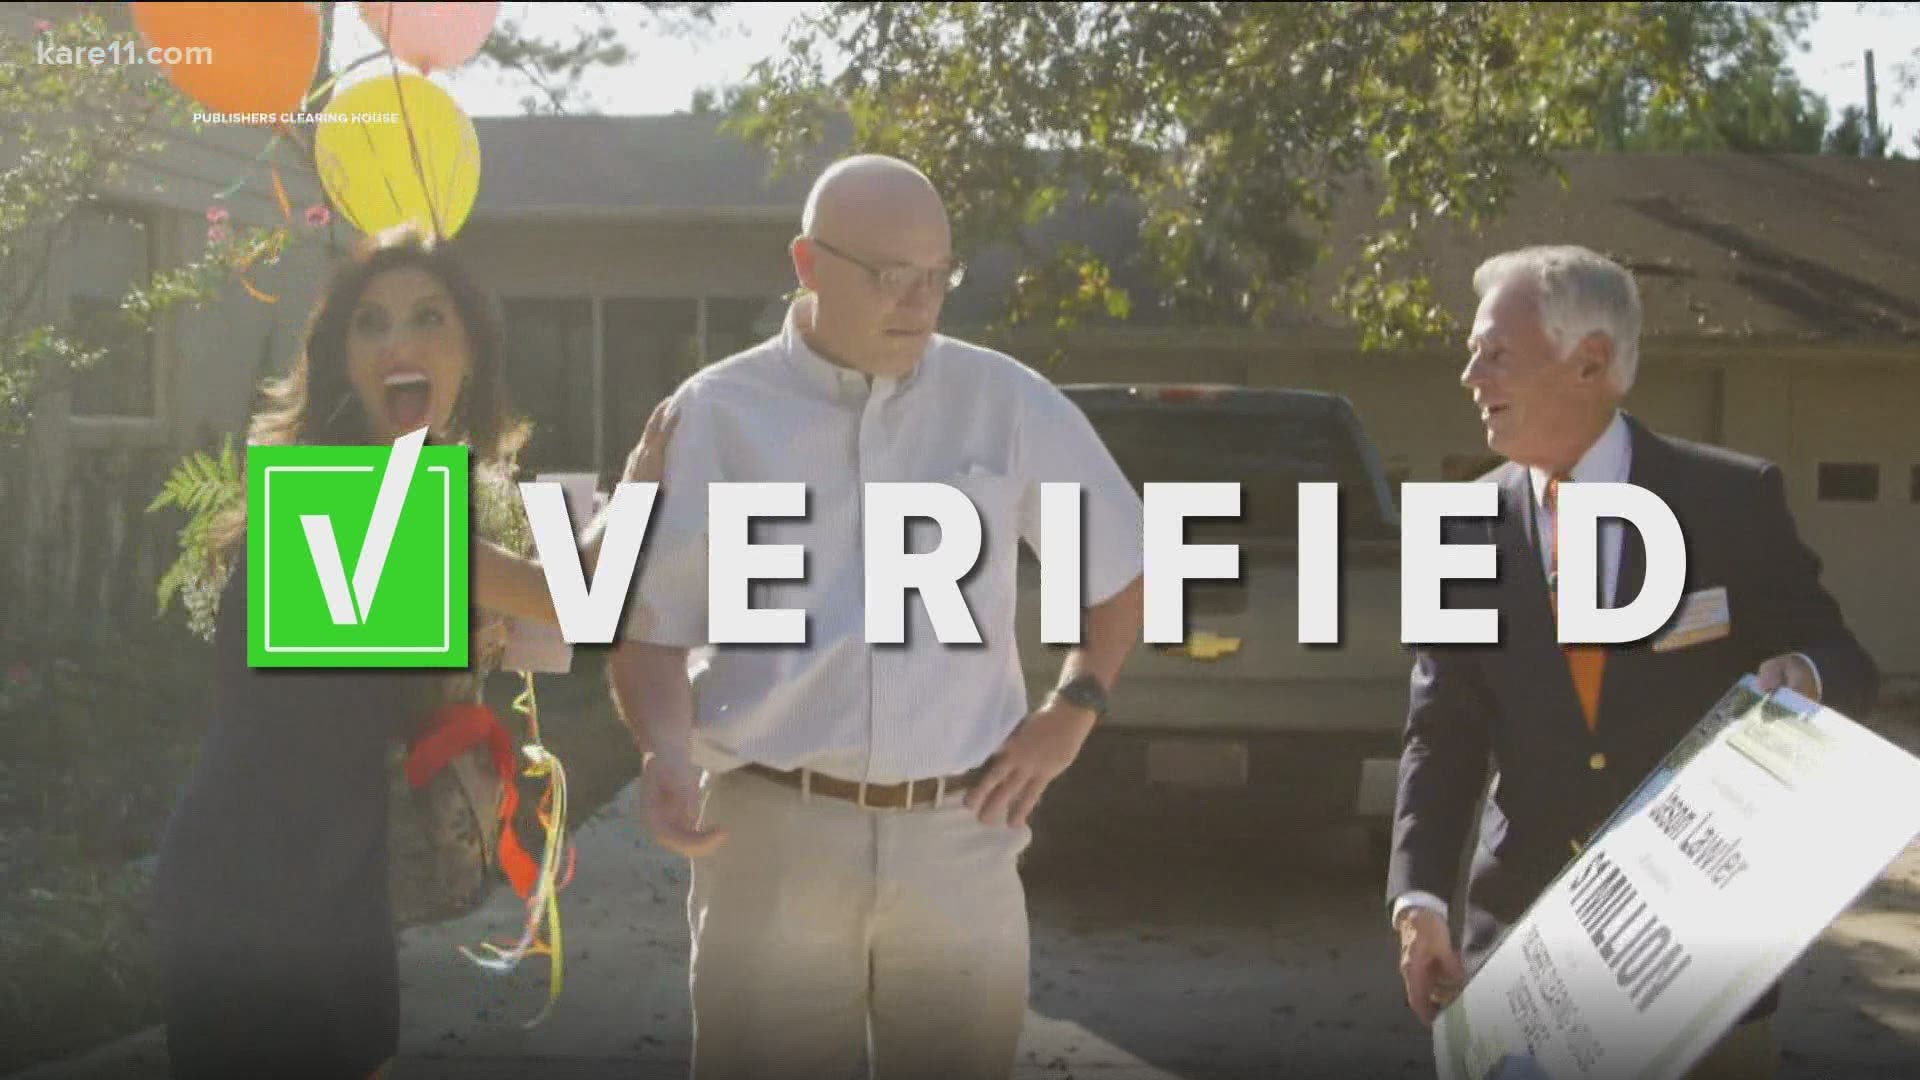 Verify Do People Really Win The Publishers Clearing House Or Is It A Scam Kare11 Com